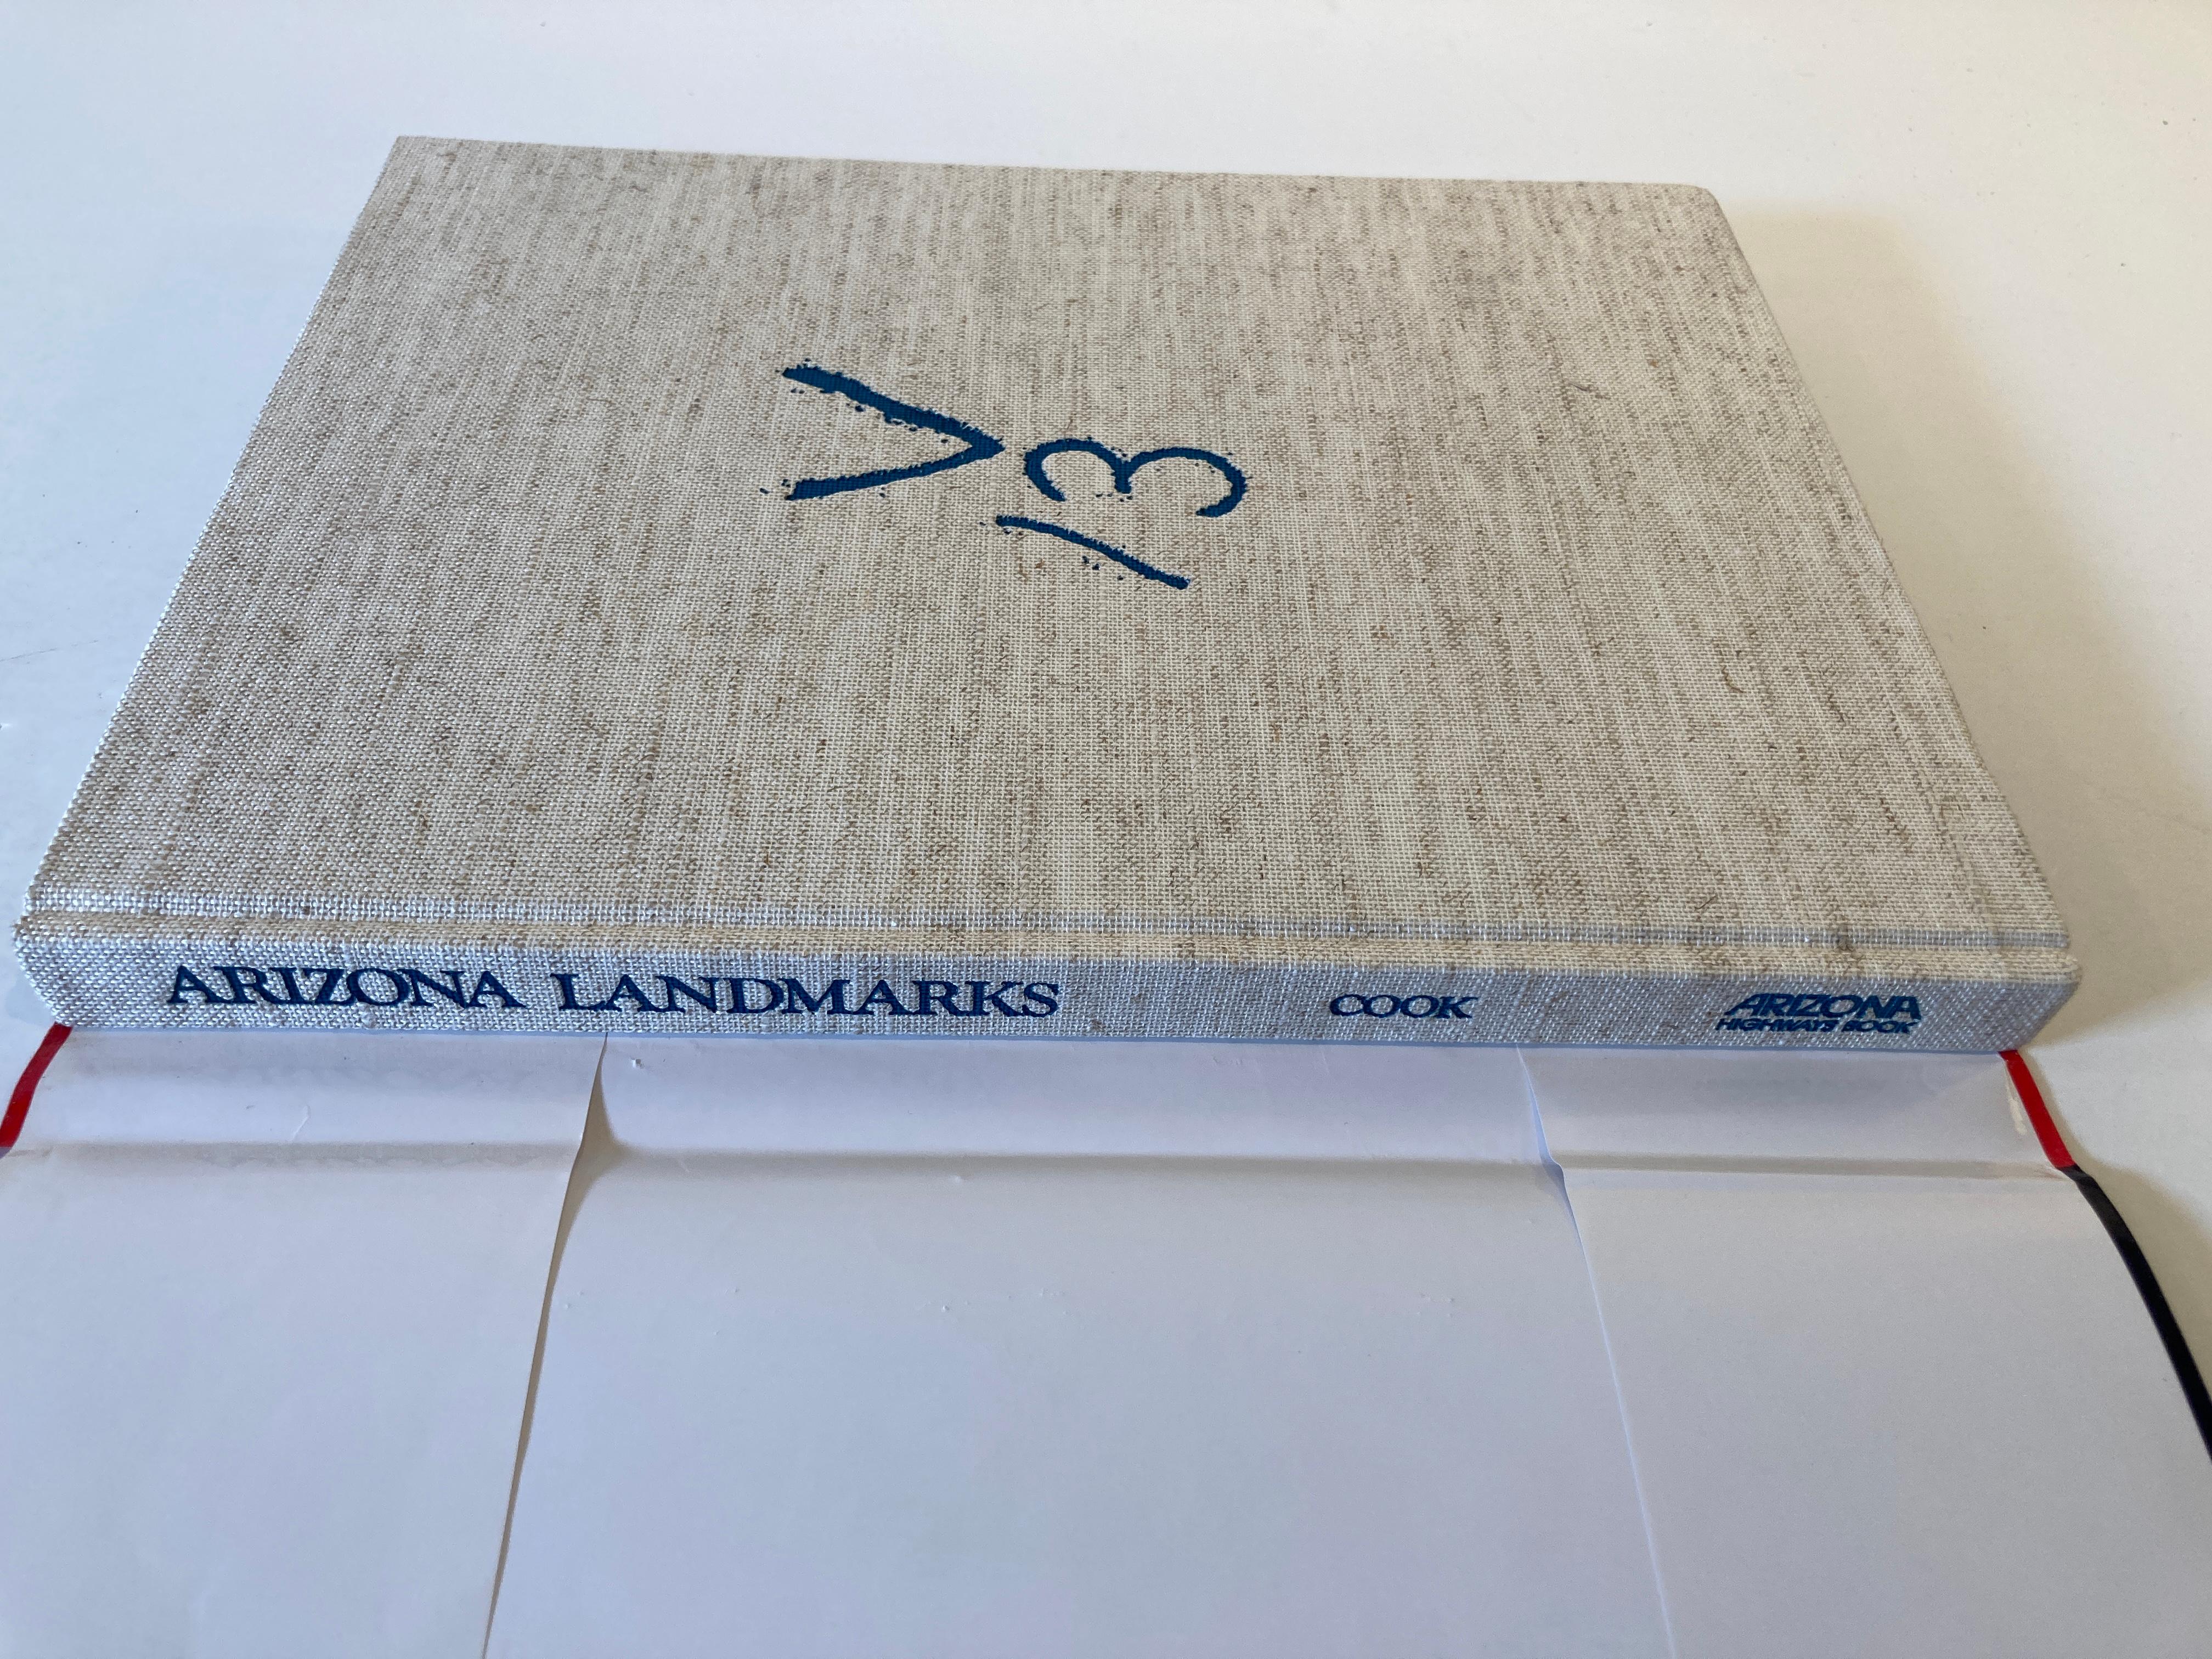 Paper Arizona Landmarks Book by James E Cook Hardcover Book, 1987